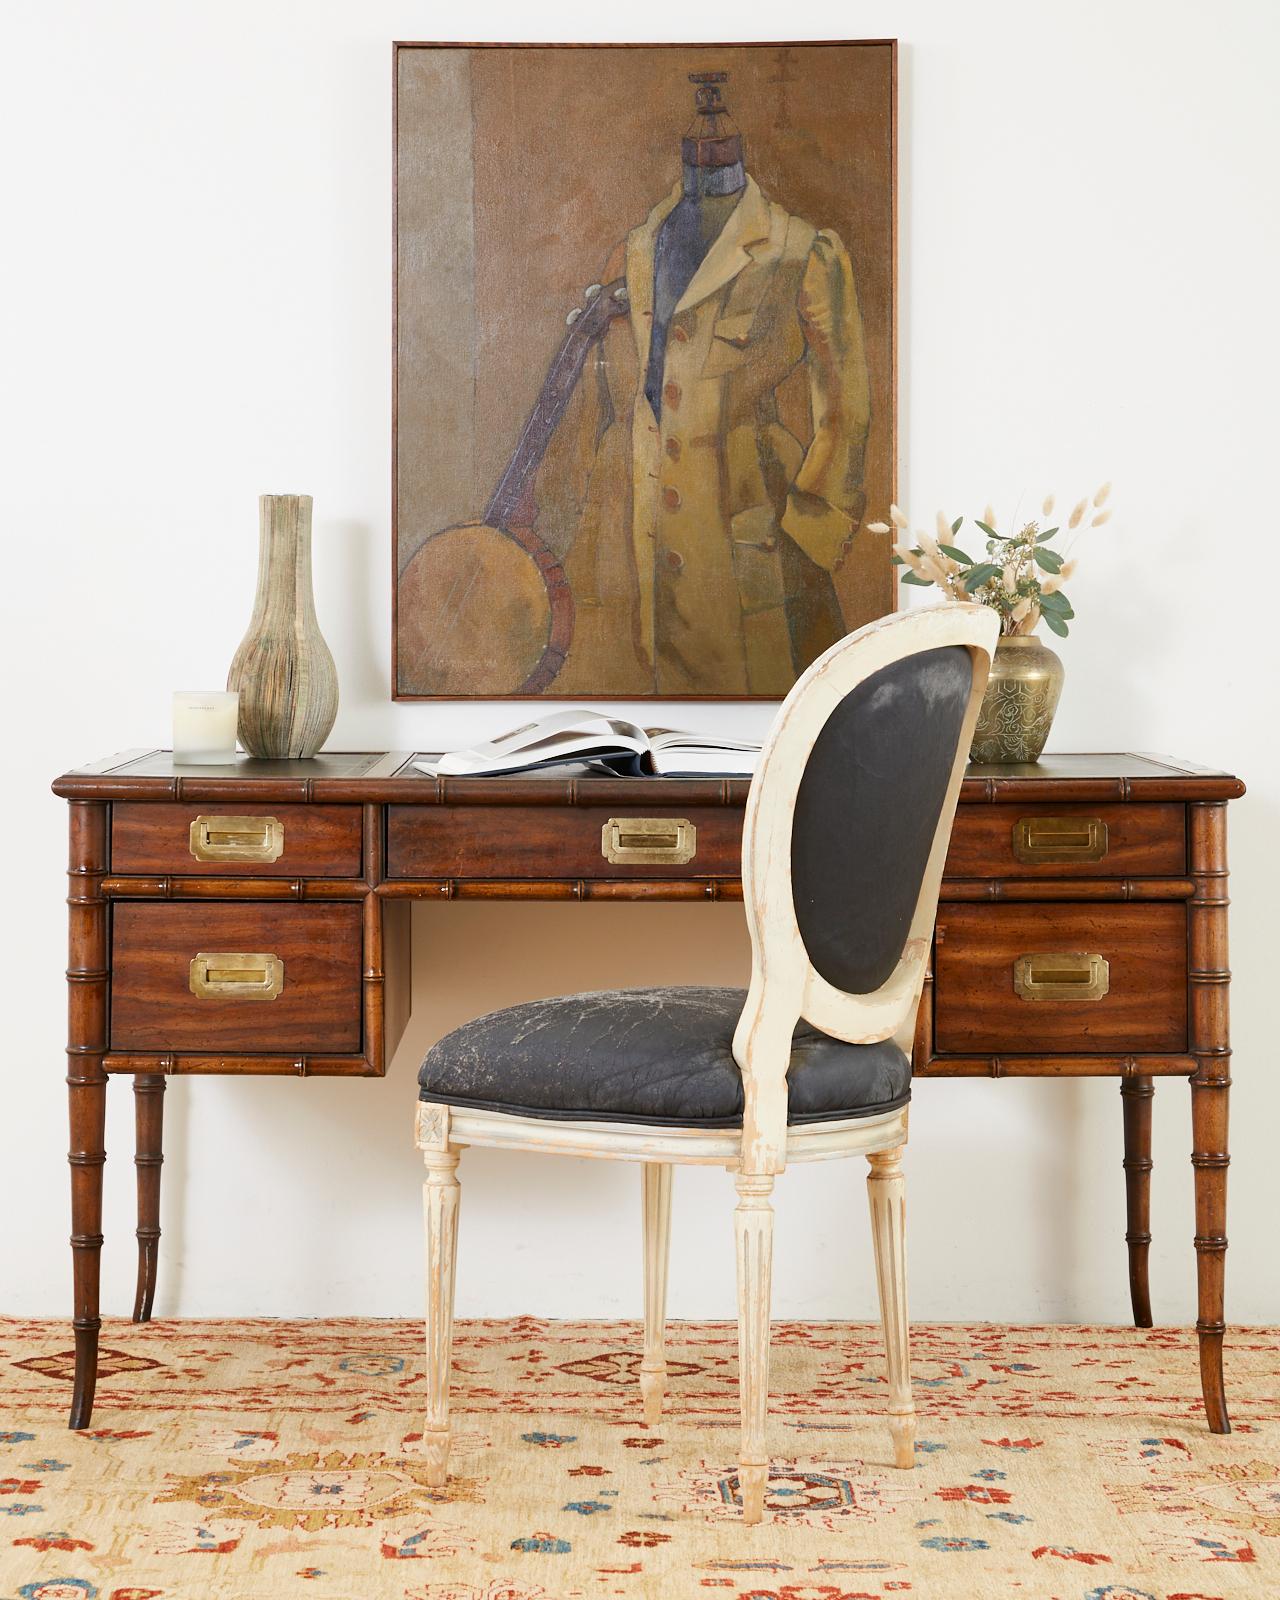 Distinctive Mid-Century Modern leather top writing table or desk by Drexel. Constructed from rich mahogany having faux bamboo legs and border trim. Fronted by five storage drawers fitted with Campaign style brass hardware pulls. The large writing